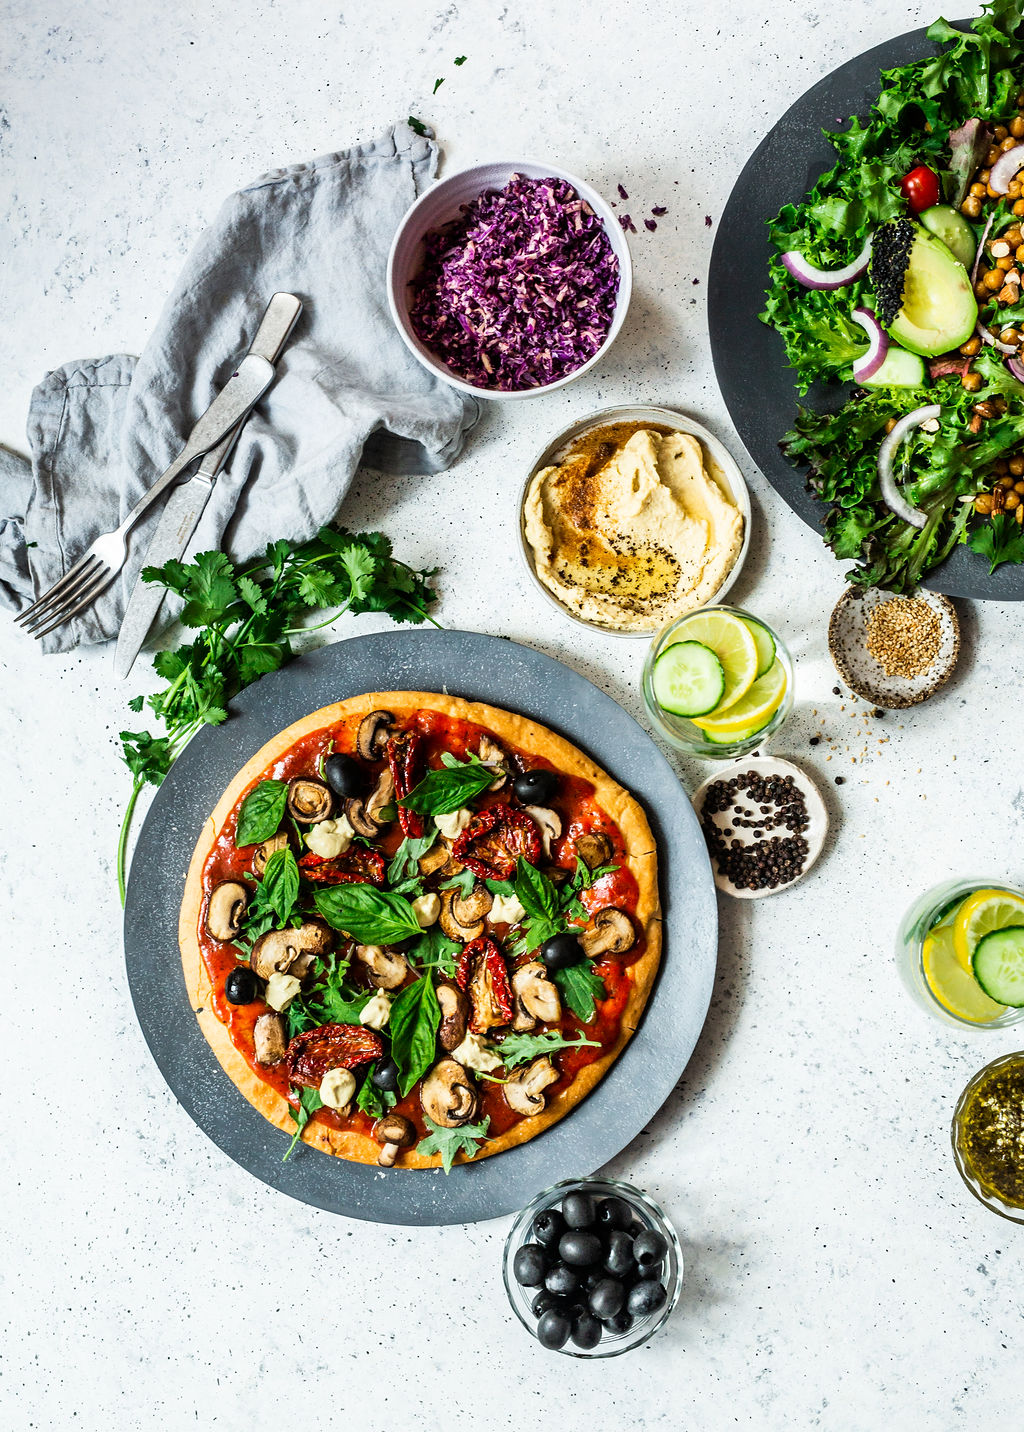 An array of food in a flatlay image. A pizza surrounded by hummus, coriander, lemons, cucumber, olives and a kale salad featuring some avocado and red onion.